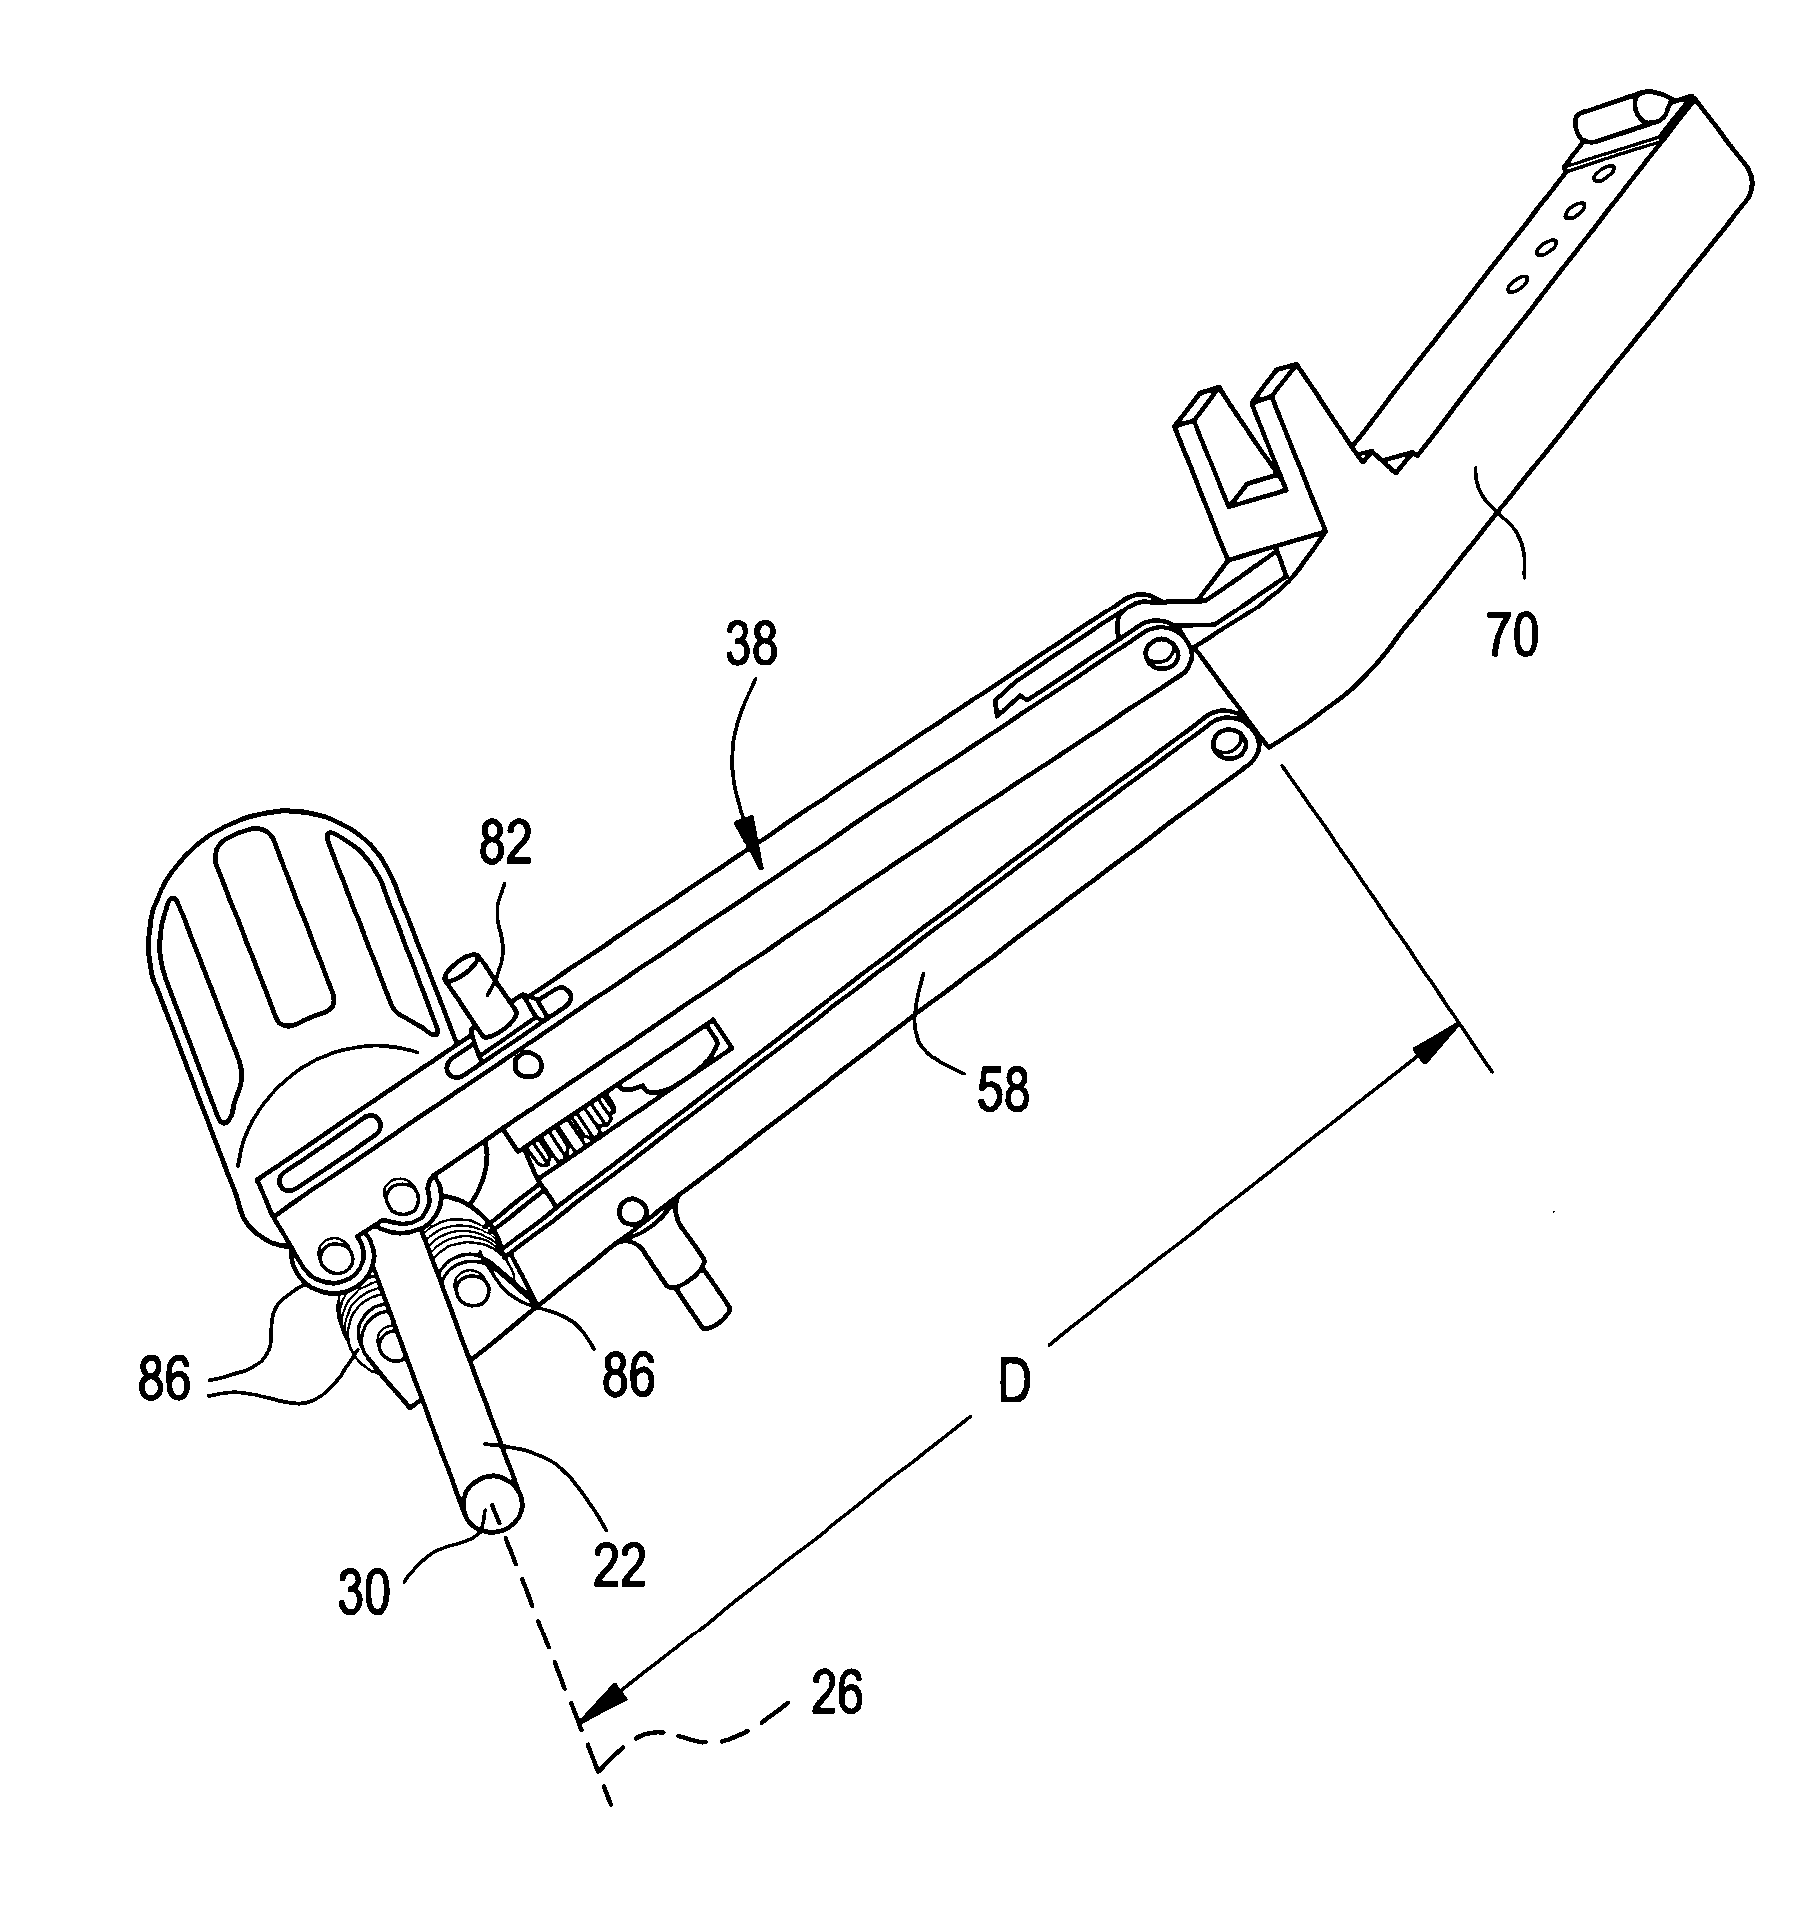 Universal attachment mechanism for attaching a tracking device to an instrument